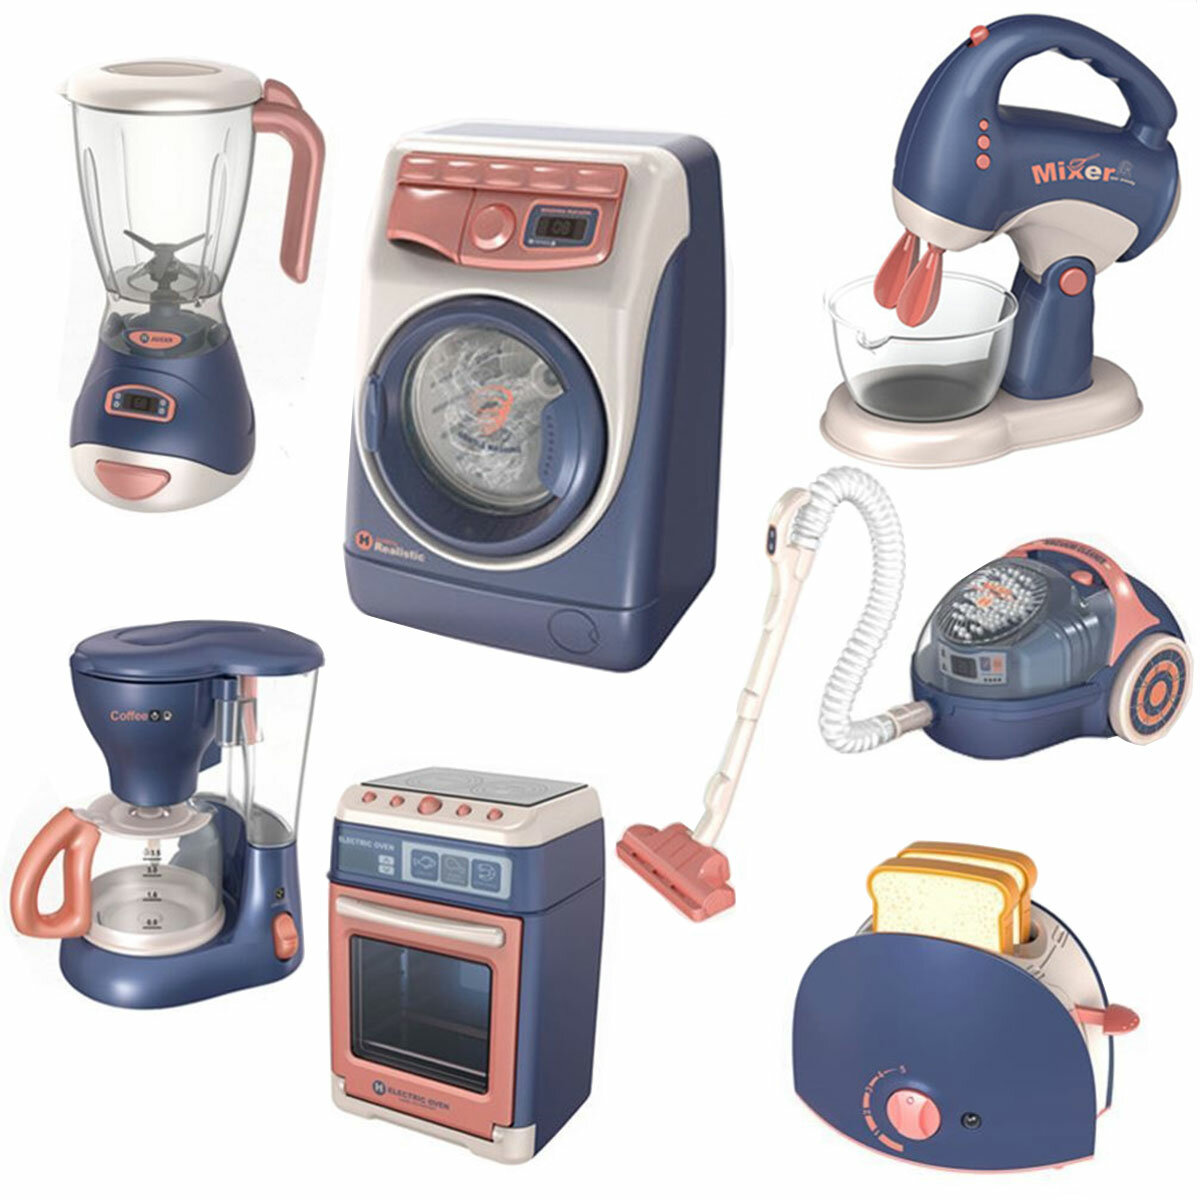 best price,simulation,electric,life,household,appliances,for,kids,1pc,eu,discount